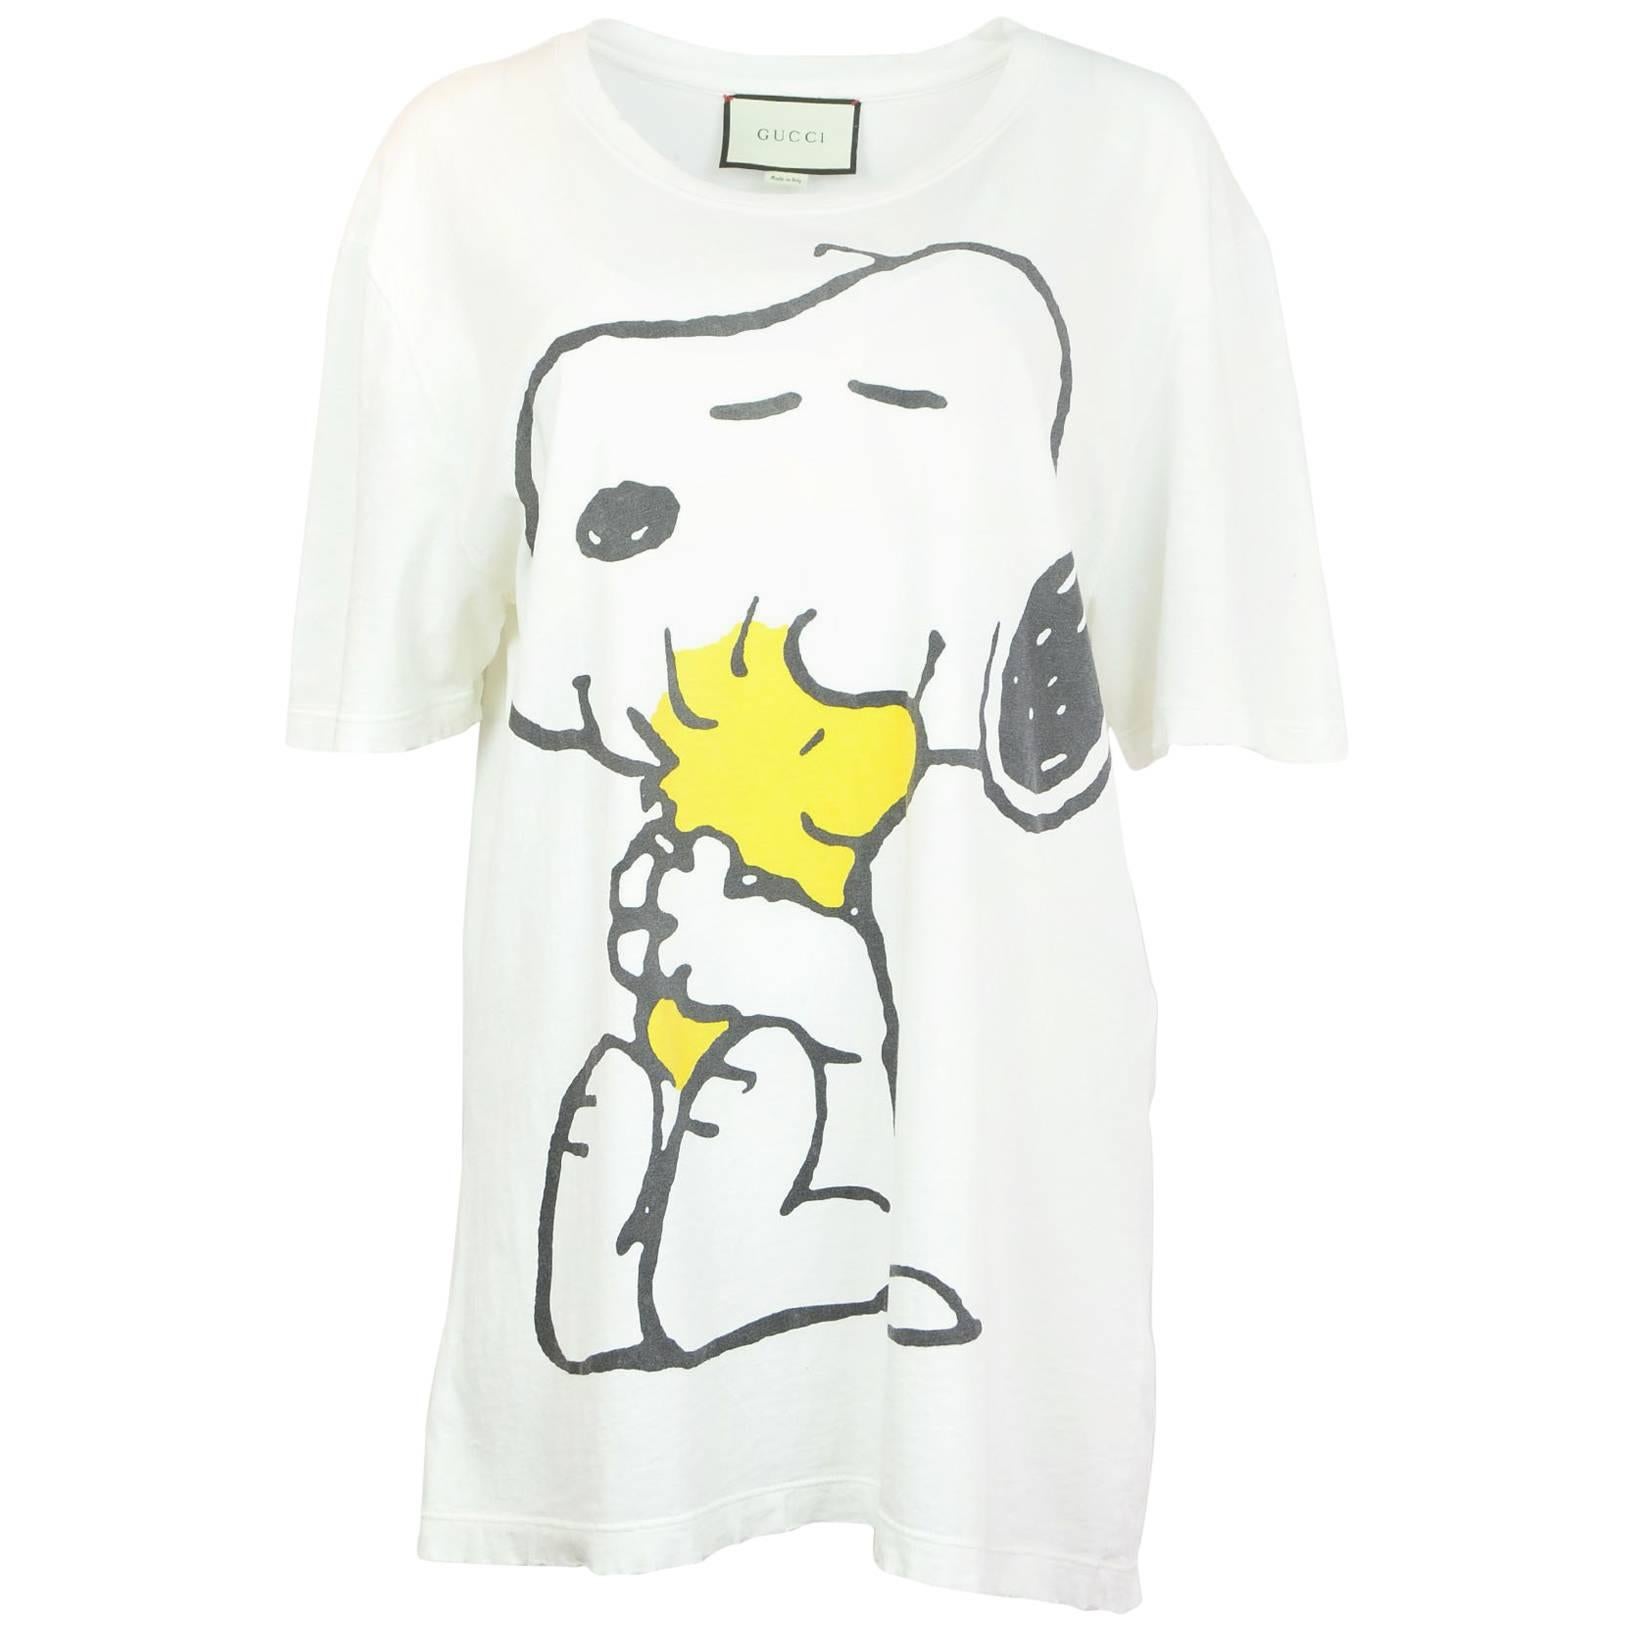 Gucci Men's '16 Snoopy and Woodstock Distressed T-Shirt Sz XL at 1stDibs |  gucci woodstock shirt, gucci snoopy t shirt, gucci t shirt label